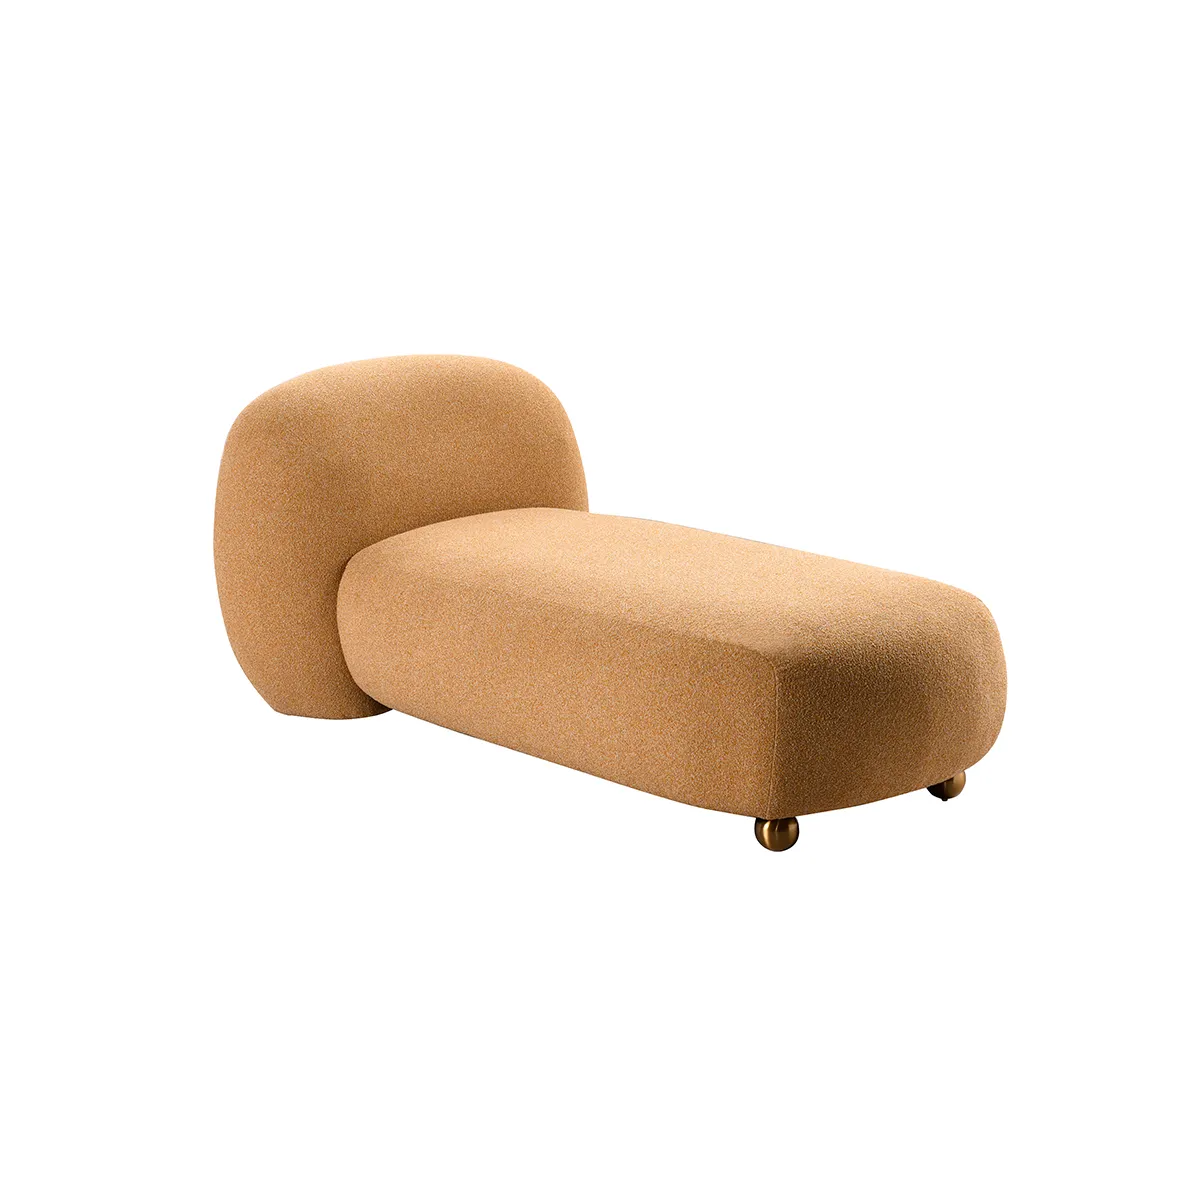 Luxury Designer Lounge Chair For Bedroom Hotel Furniture Indoor Fabric Sofa Bed Chaise Longue Chair Bench